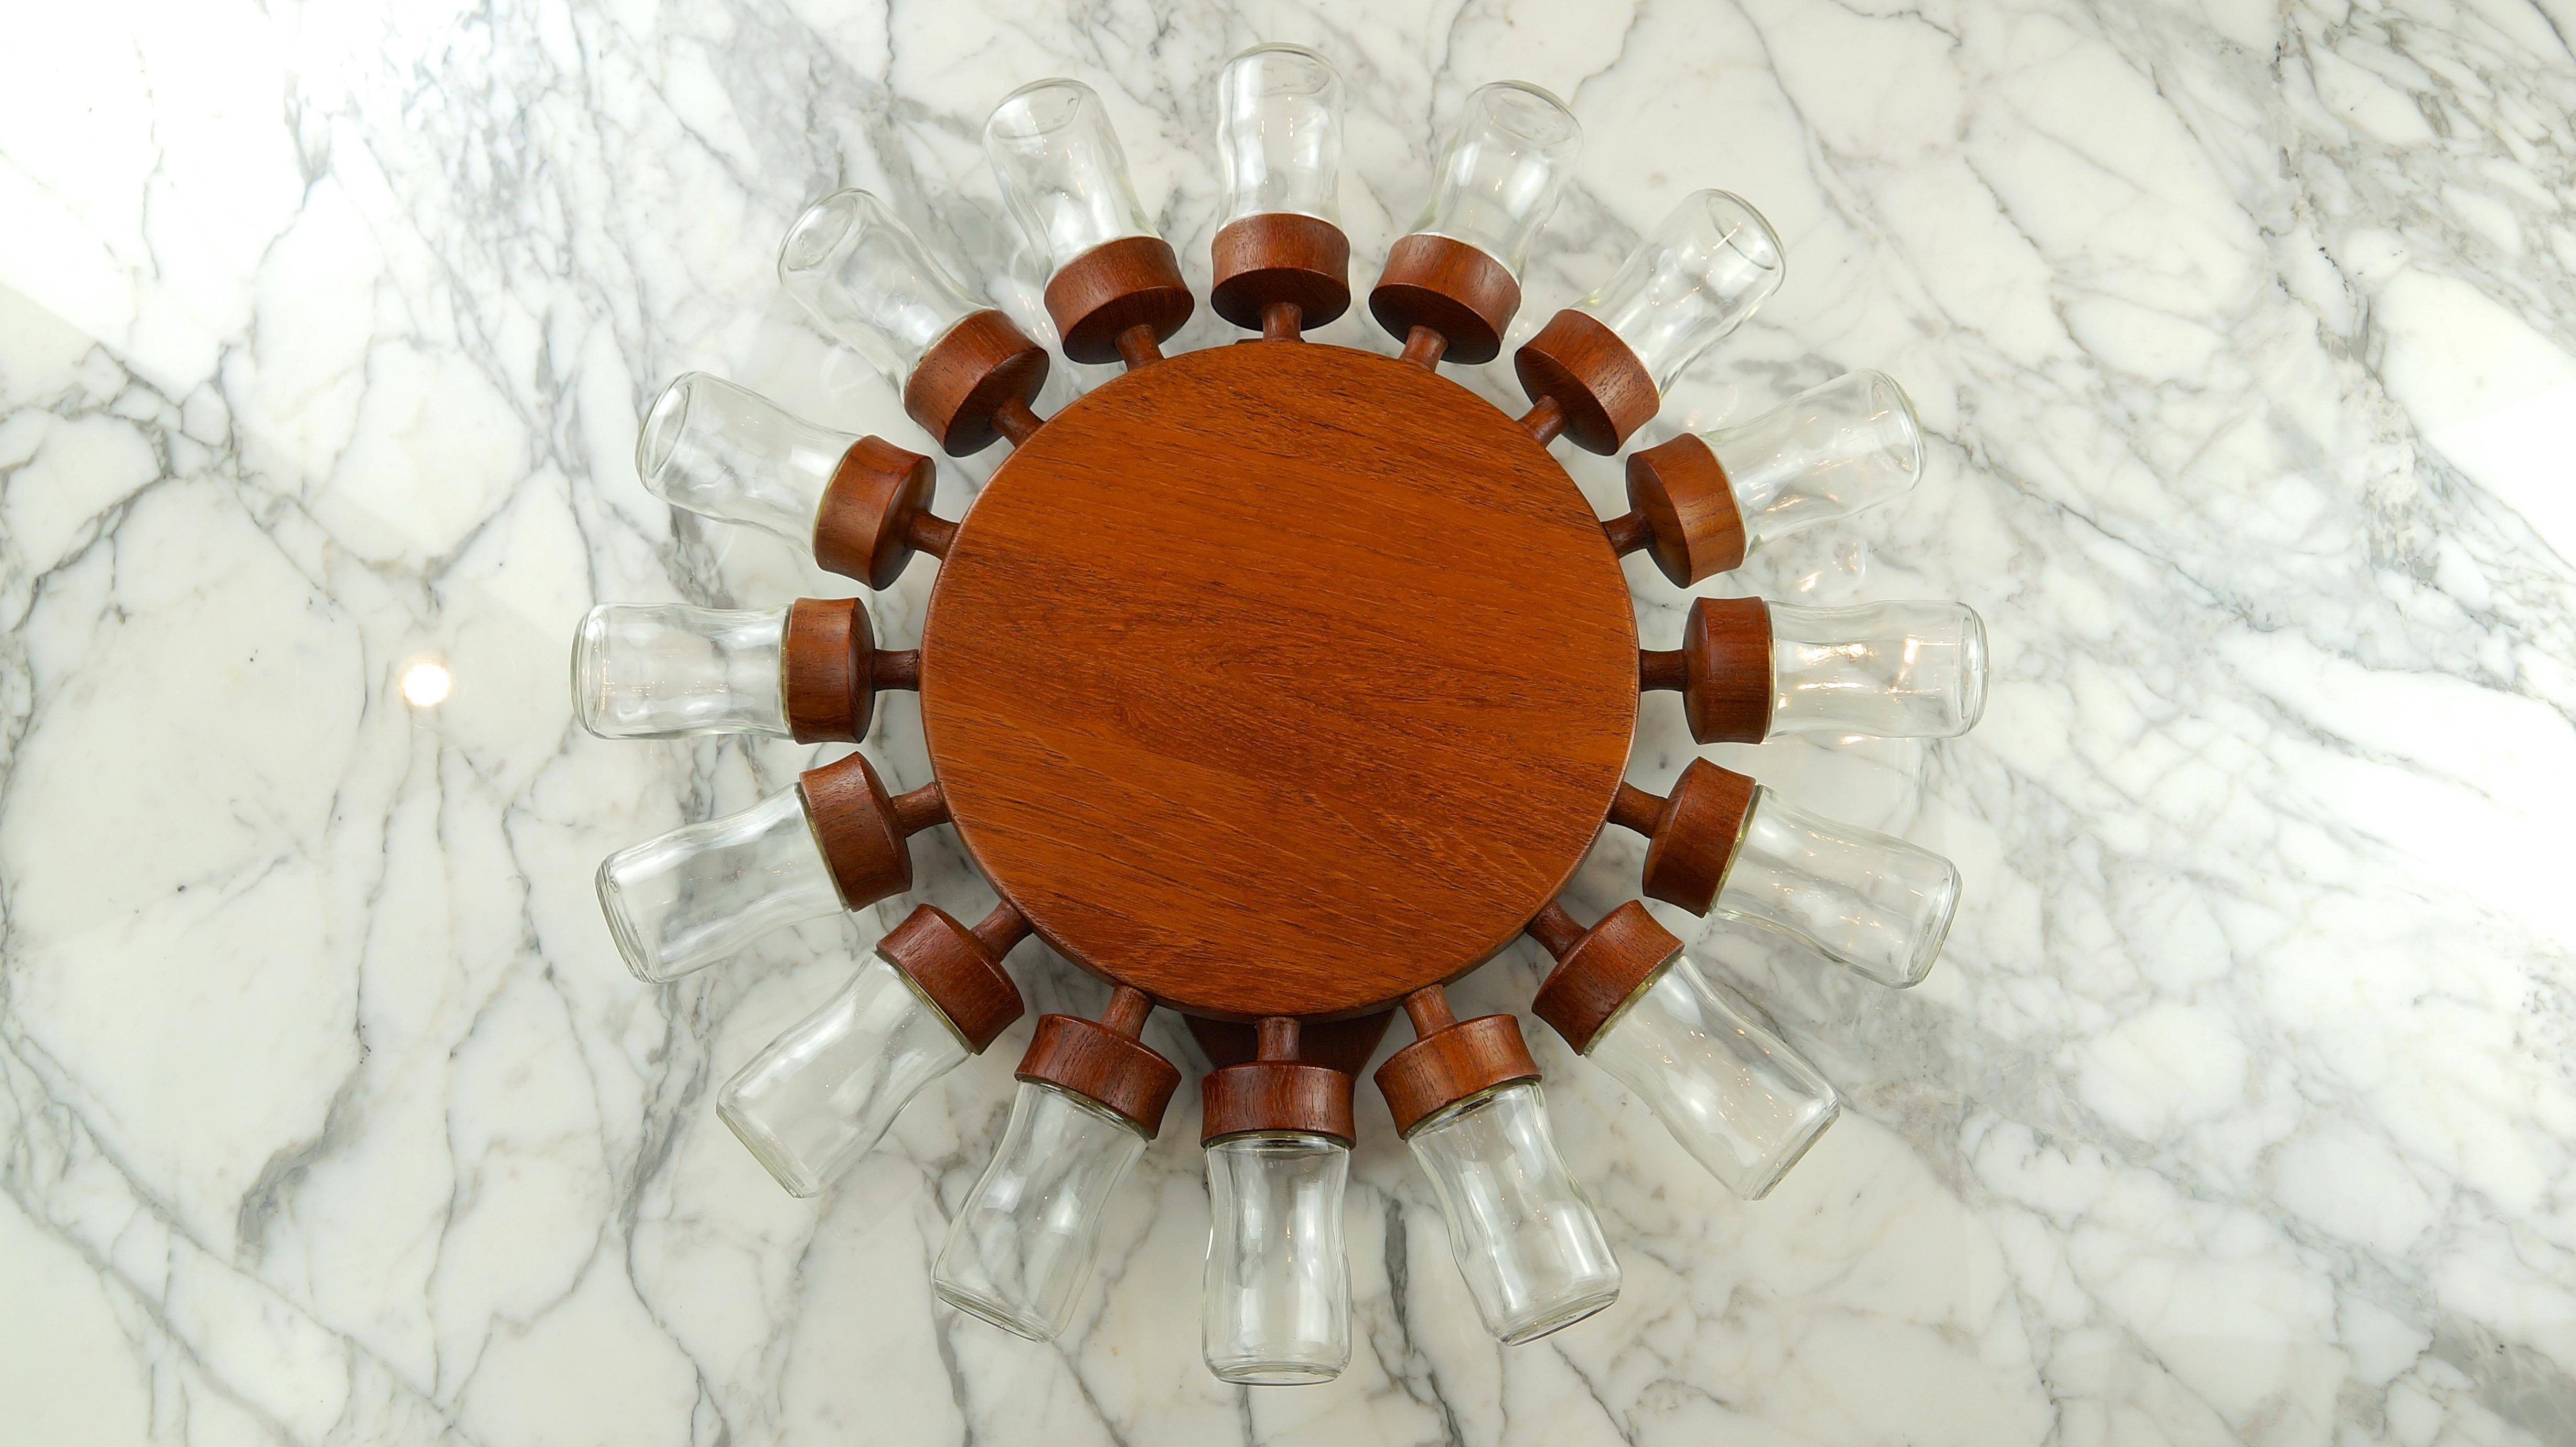 A 16 jar teak Digsmed spinning spice wheel, Denmark, 1960s. This particular piece is rare, not only because it is the largest variant offered, but also because it has the hourglass taper to the arms going out to the jars and on the wooden